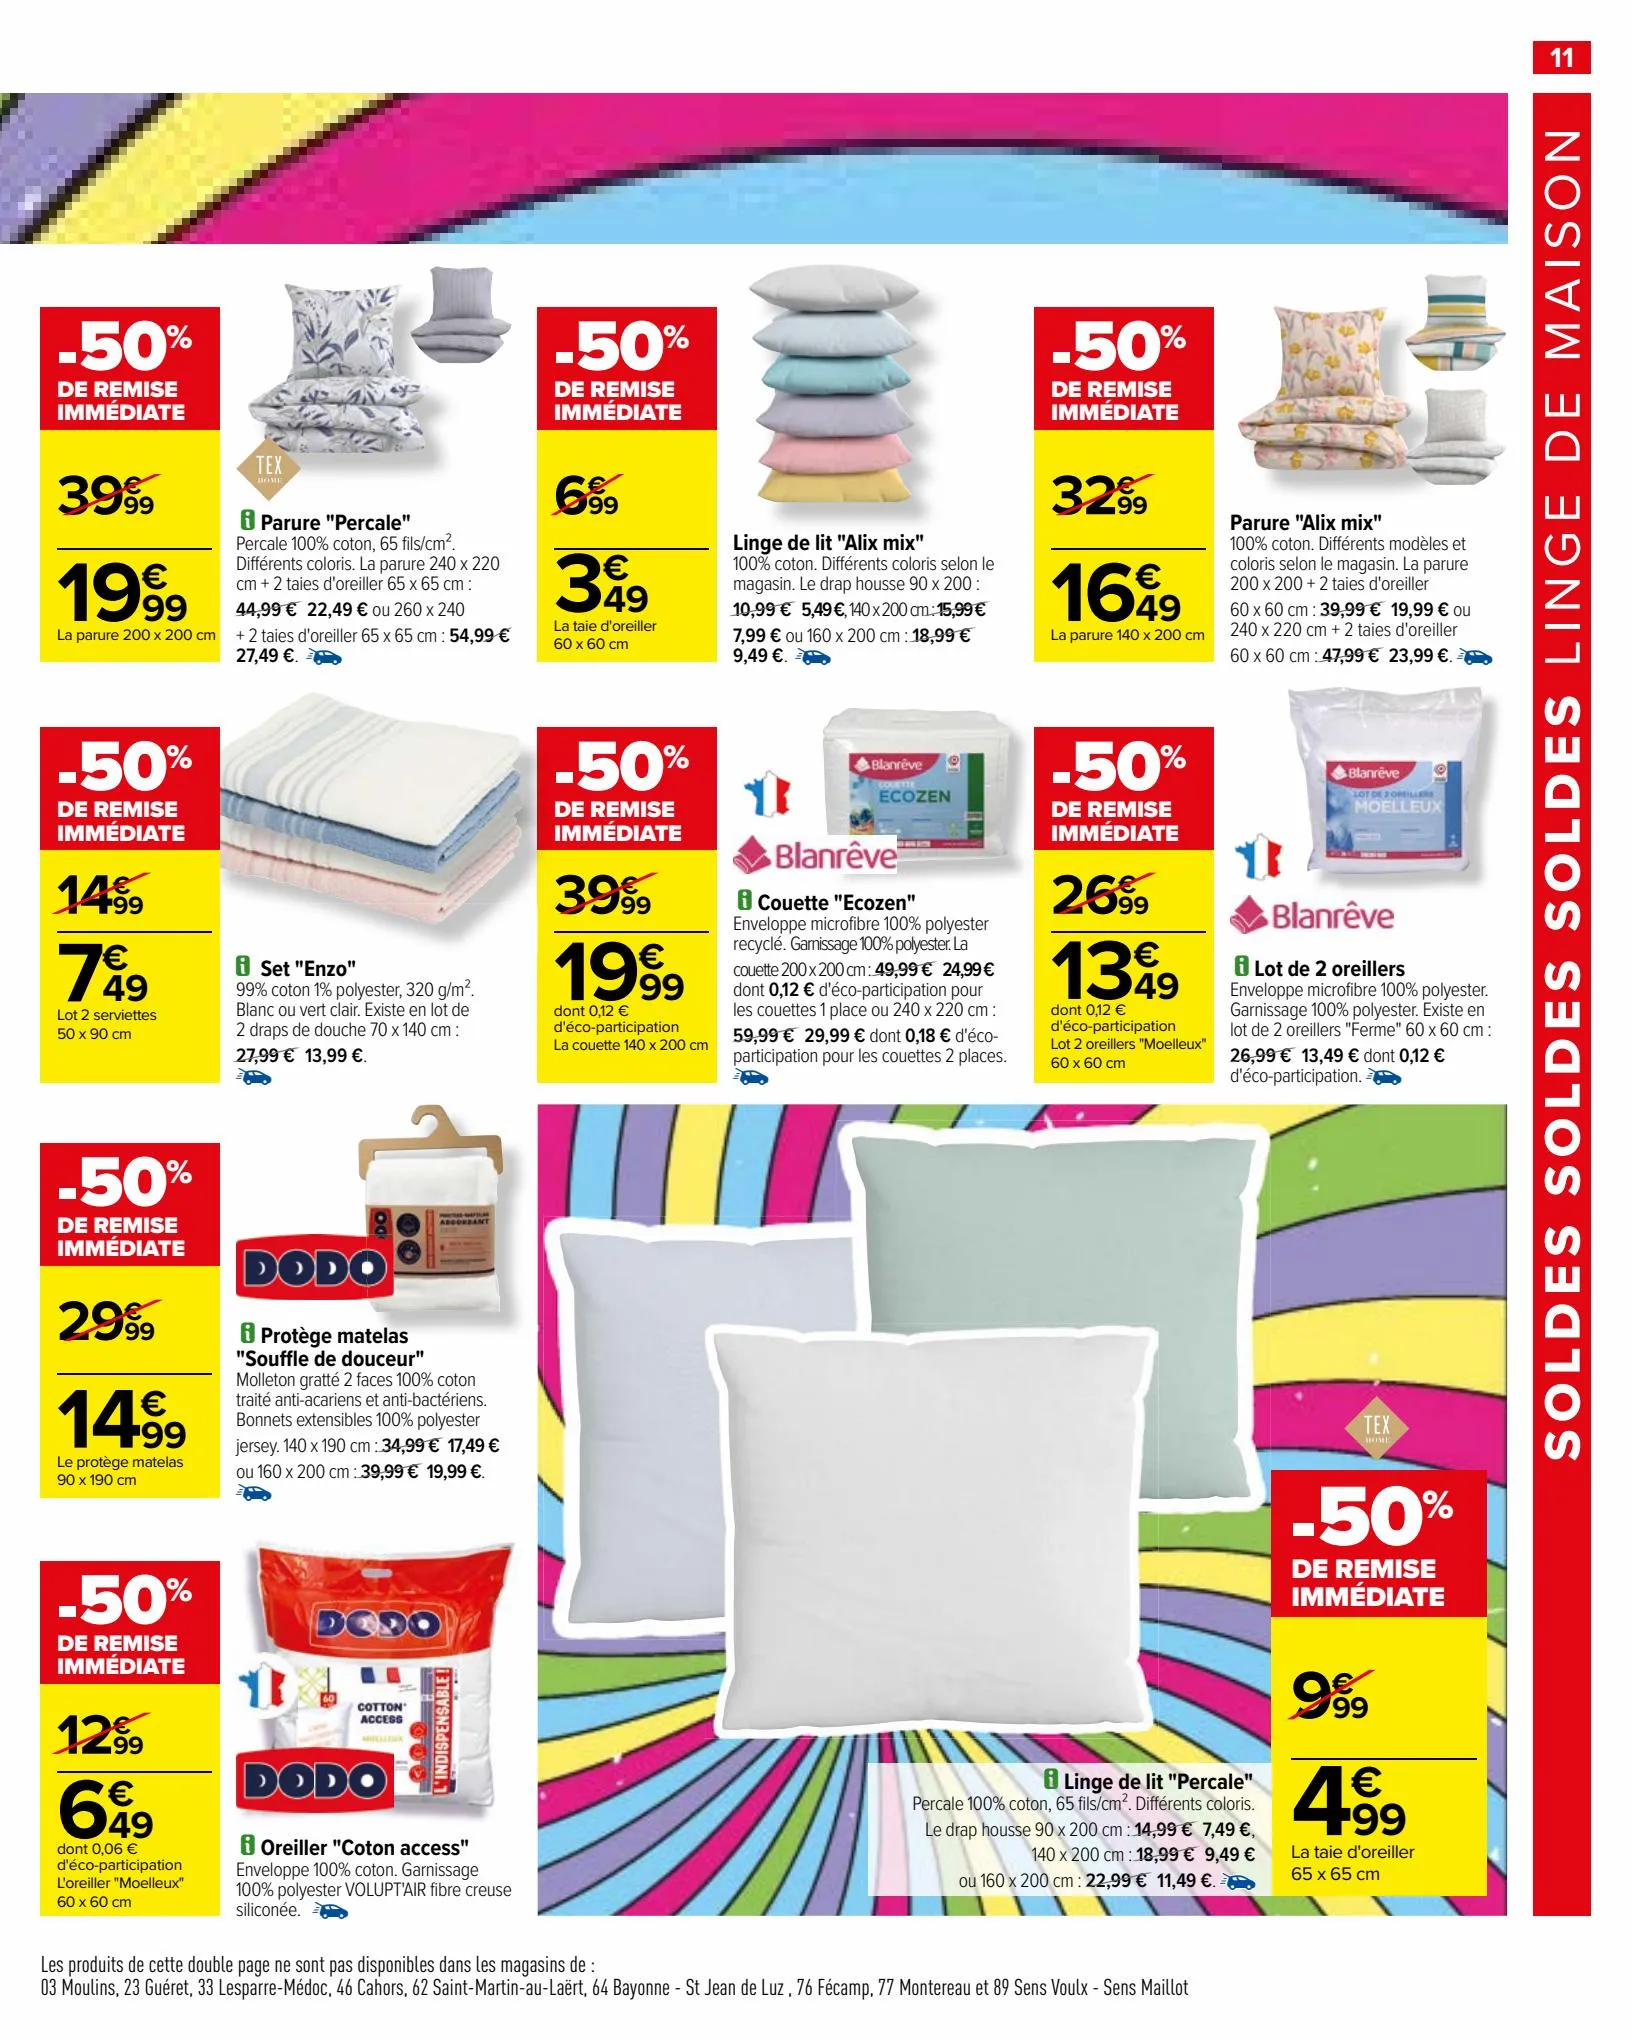 Catalogue SOLDES, page 00011